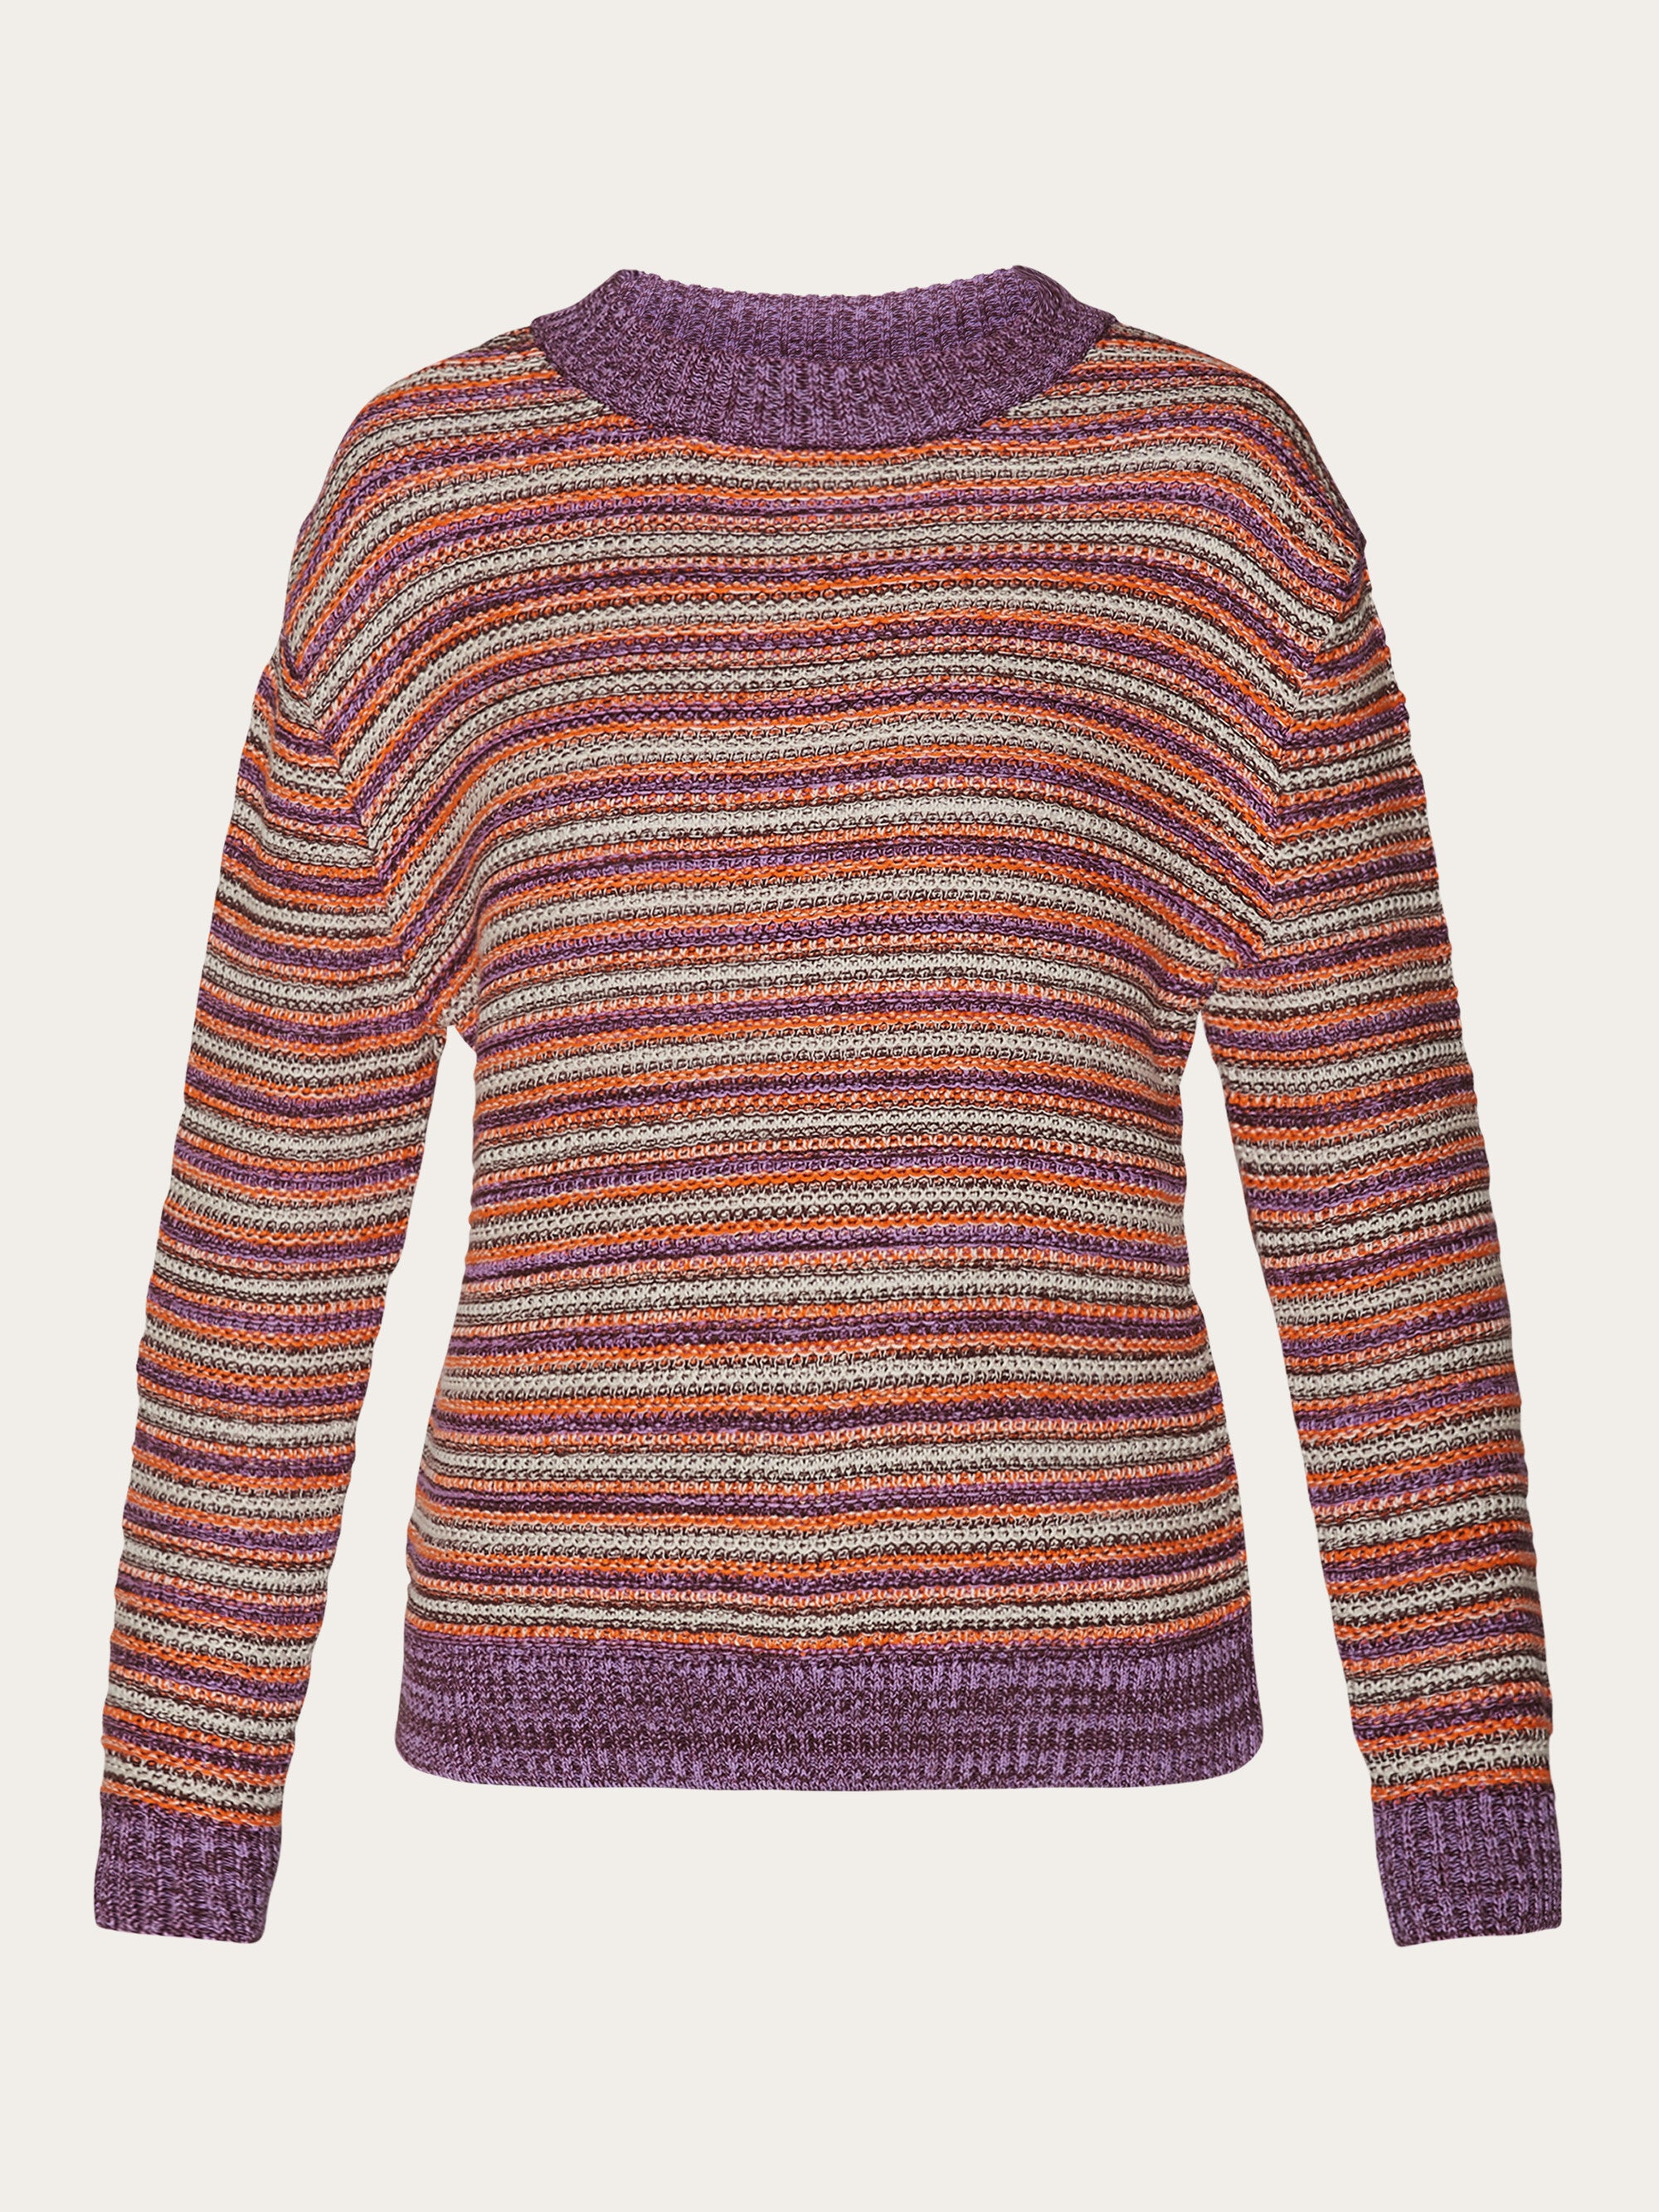 Buy Multi color knitted crew neck - Lenzing/Vegan - Multi color stripe -  from KnowledgeCotton Apparel®